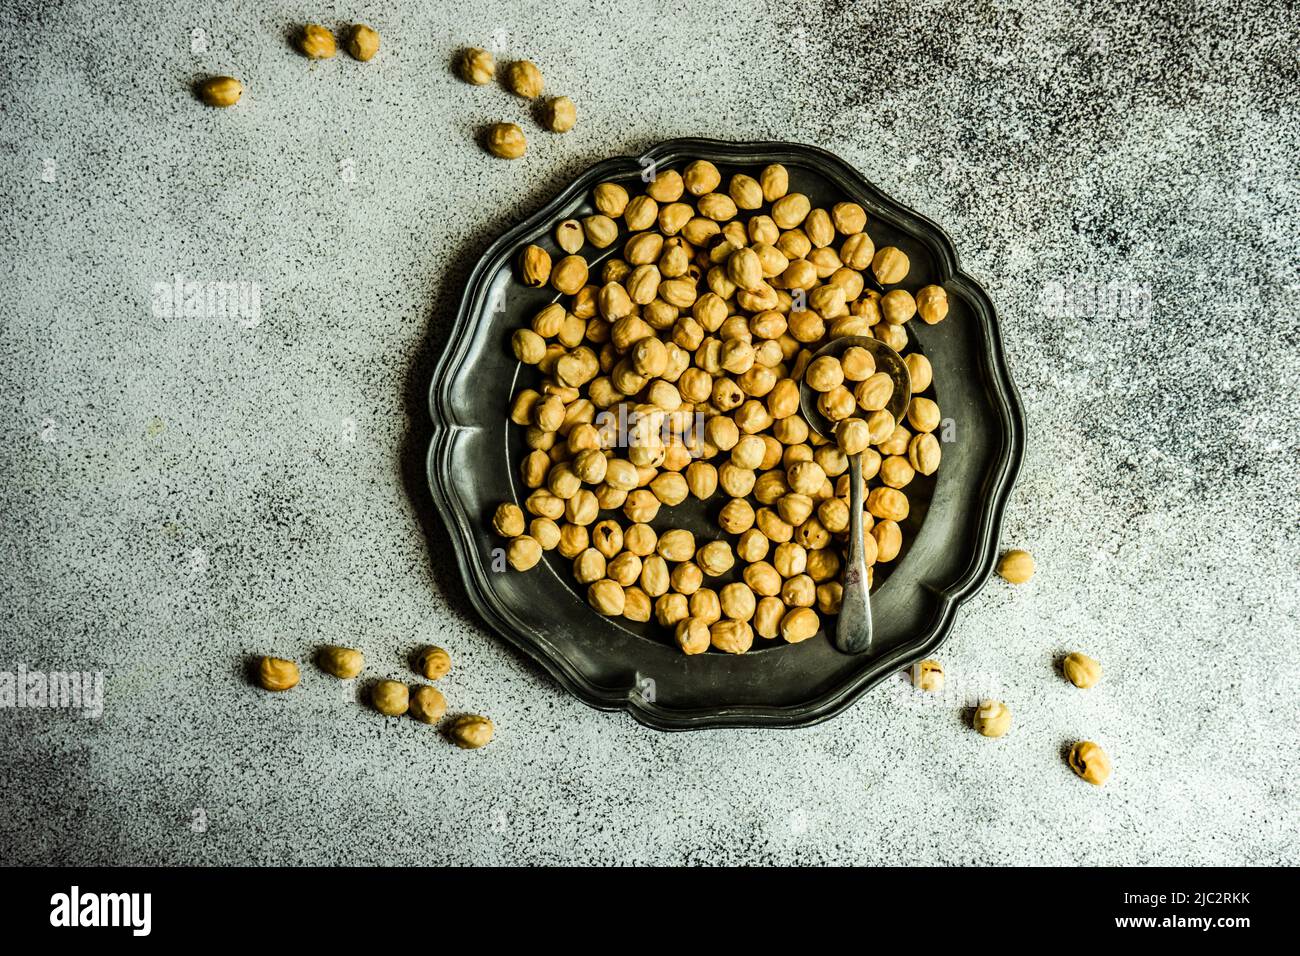 Overhead view of hazelnuts on a pewter plate Stock Photo